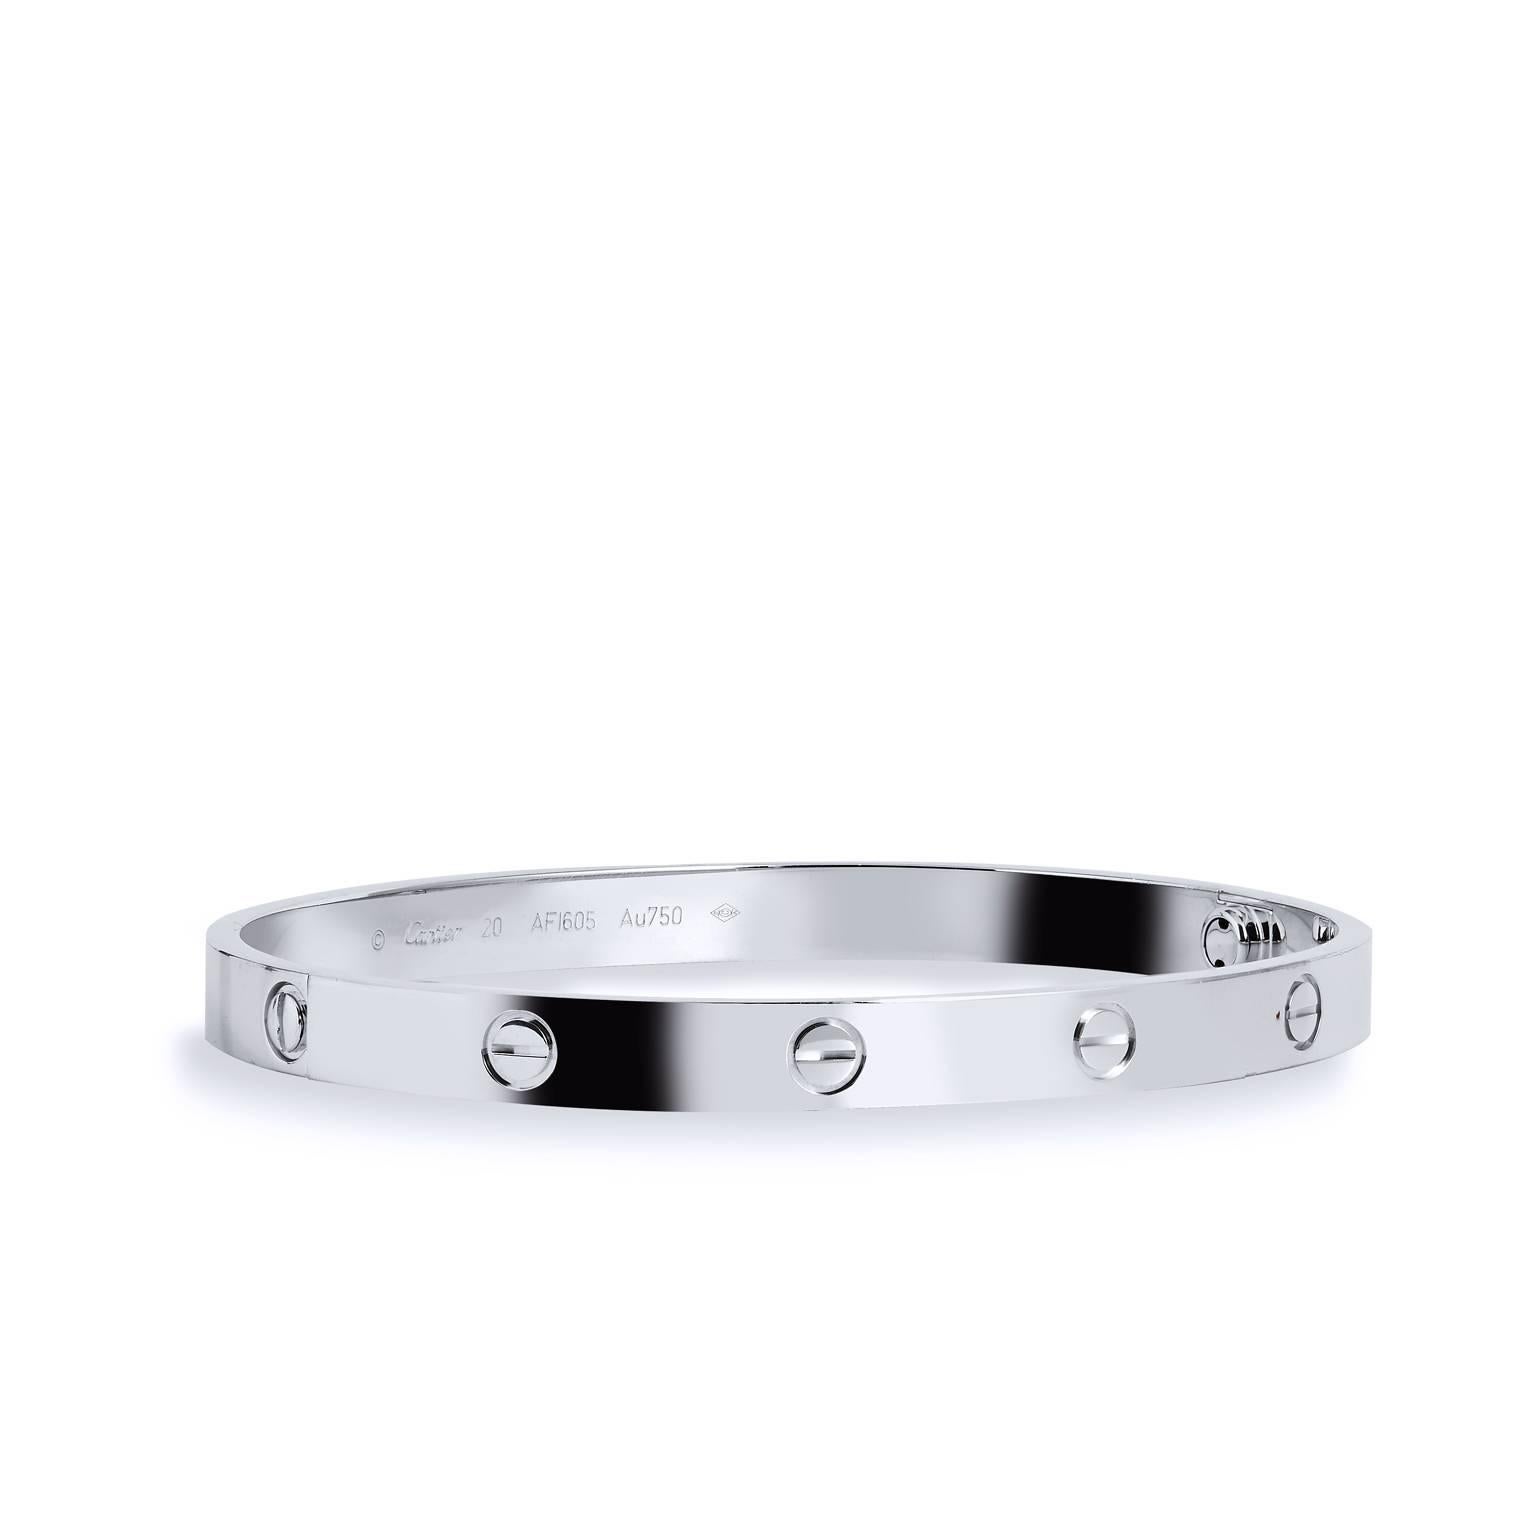 Effortlessly integrating strength and elegance, this bangle is a part of Cartier’s famous LOVE collection. This piece is crafted in 18kt white gold and features Cartier’s iconic screw motifs. It’s in excellent condition and comes with original box